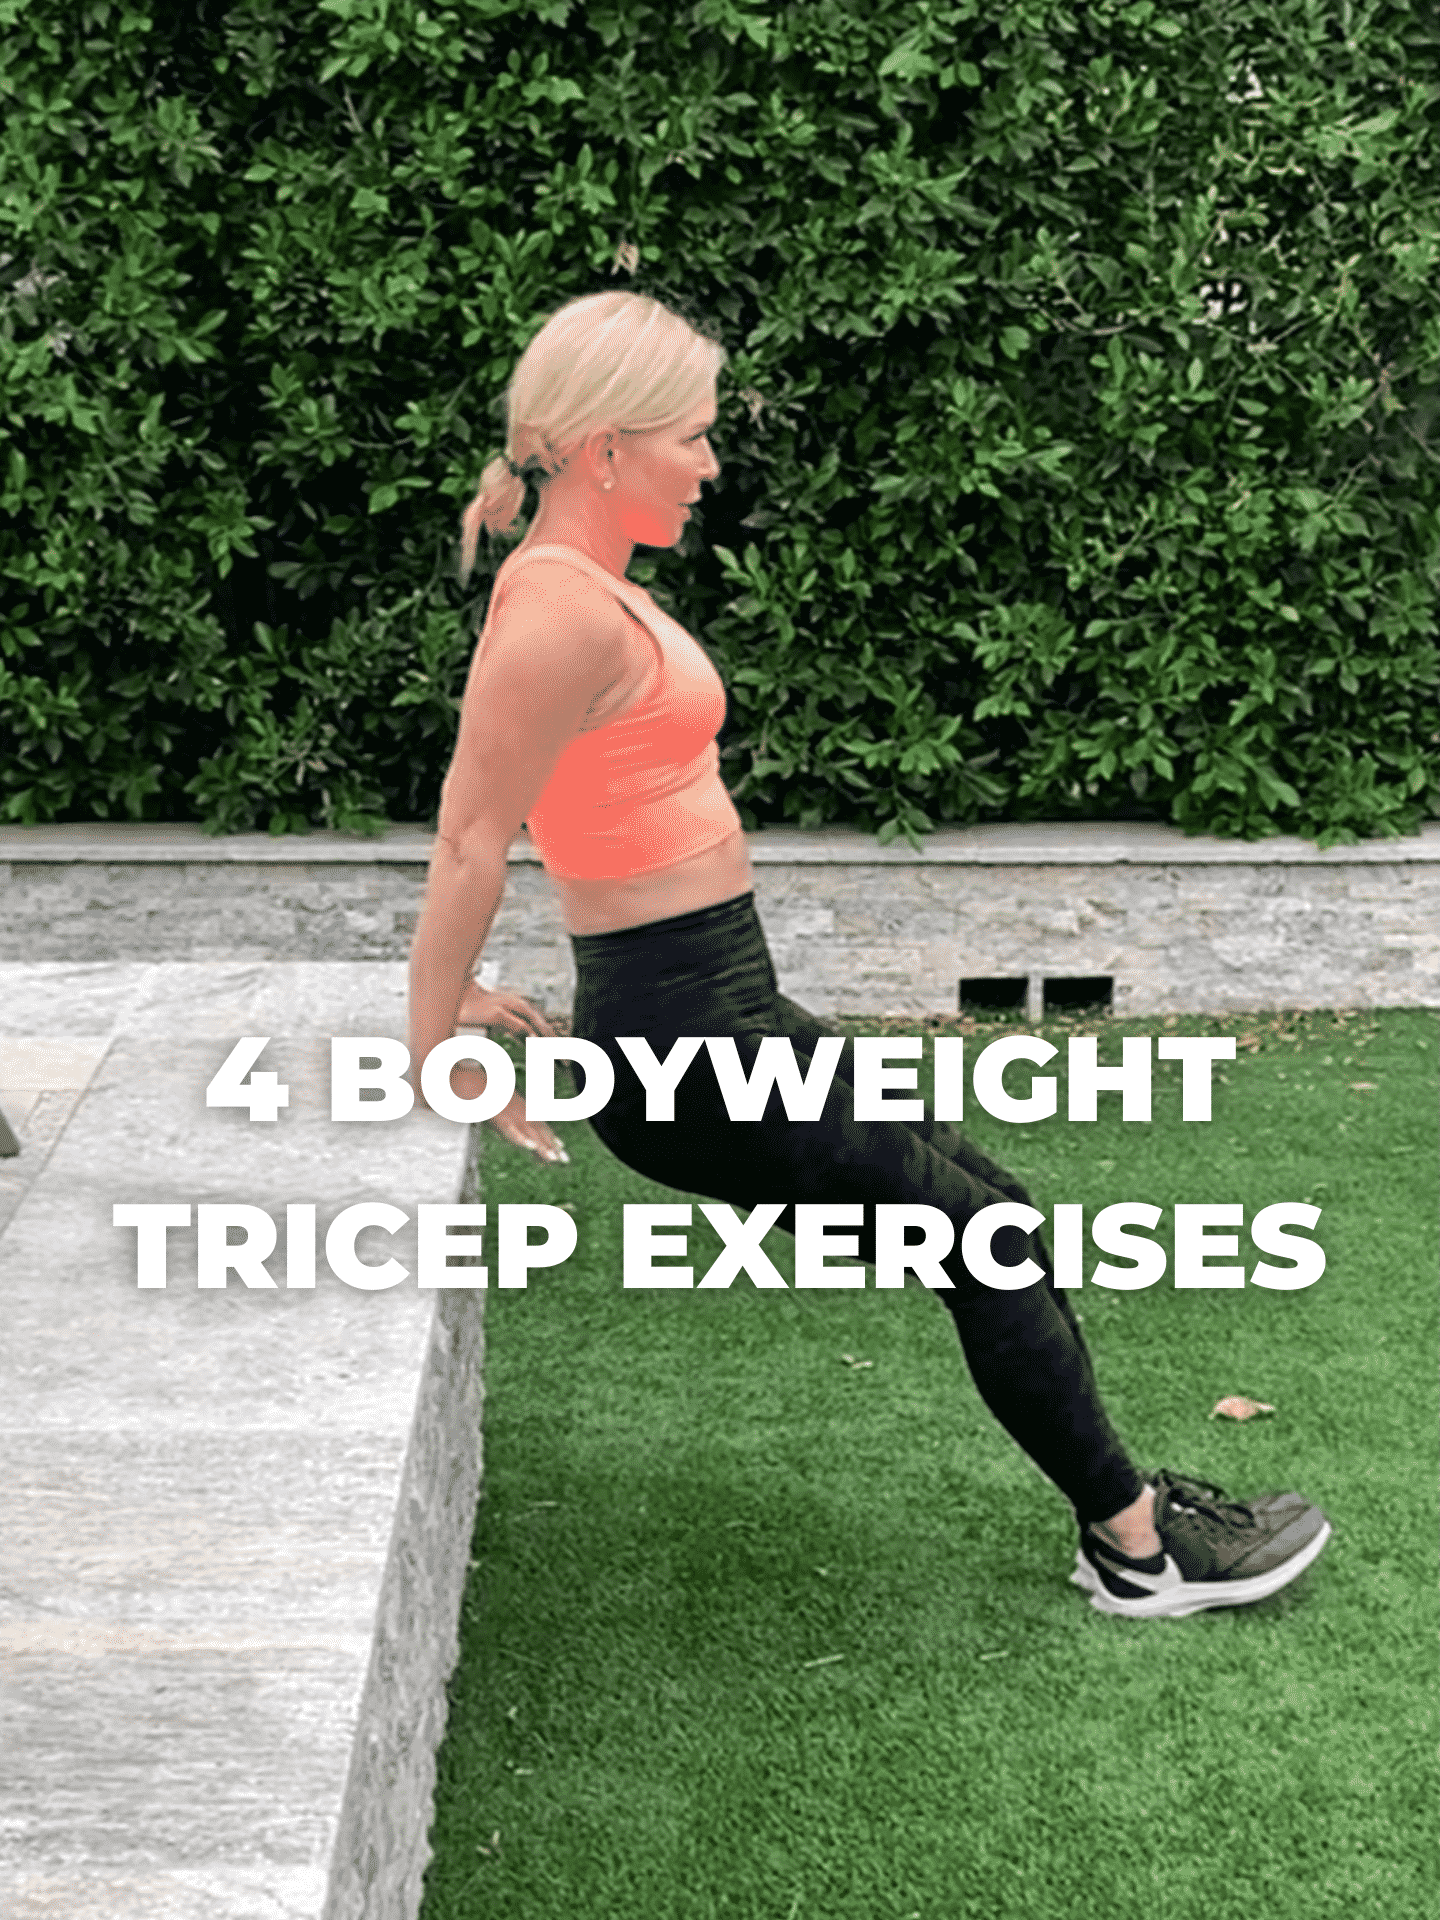 https://gethealthyu.com/wp-content/uploads/2021/04/4-BODYWEIGHT-TRICEP-EXERCISES.png